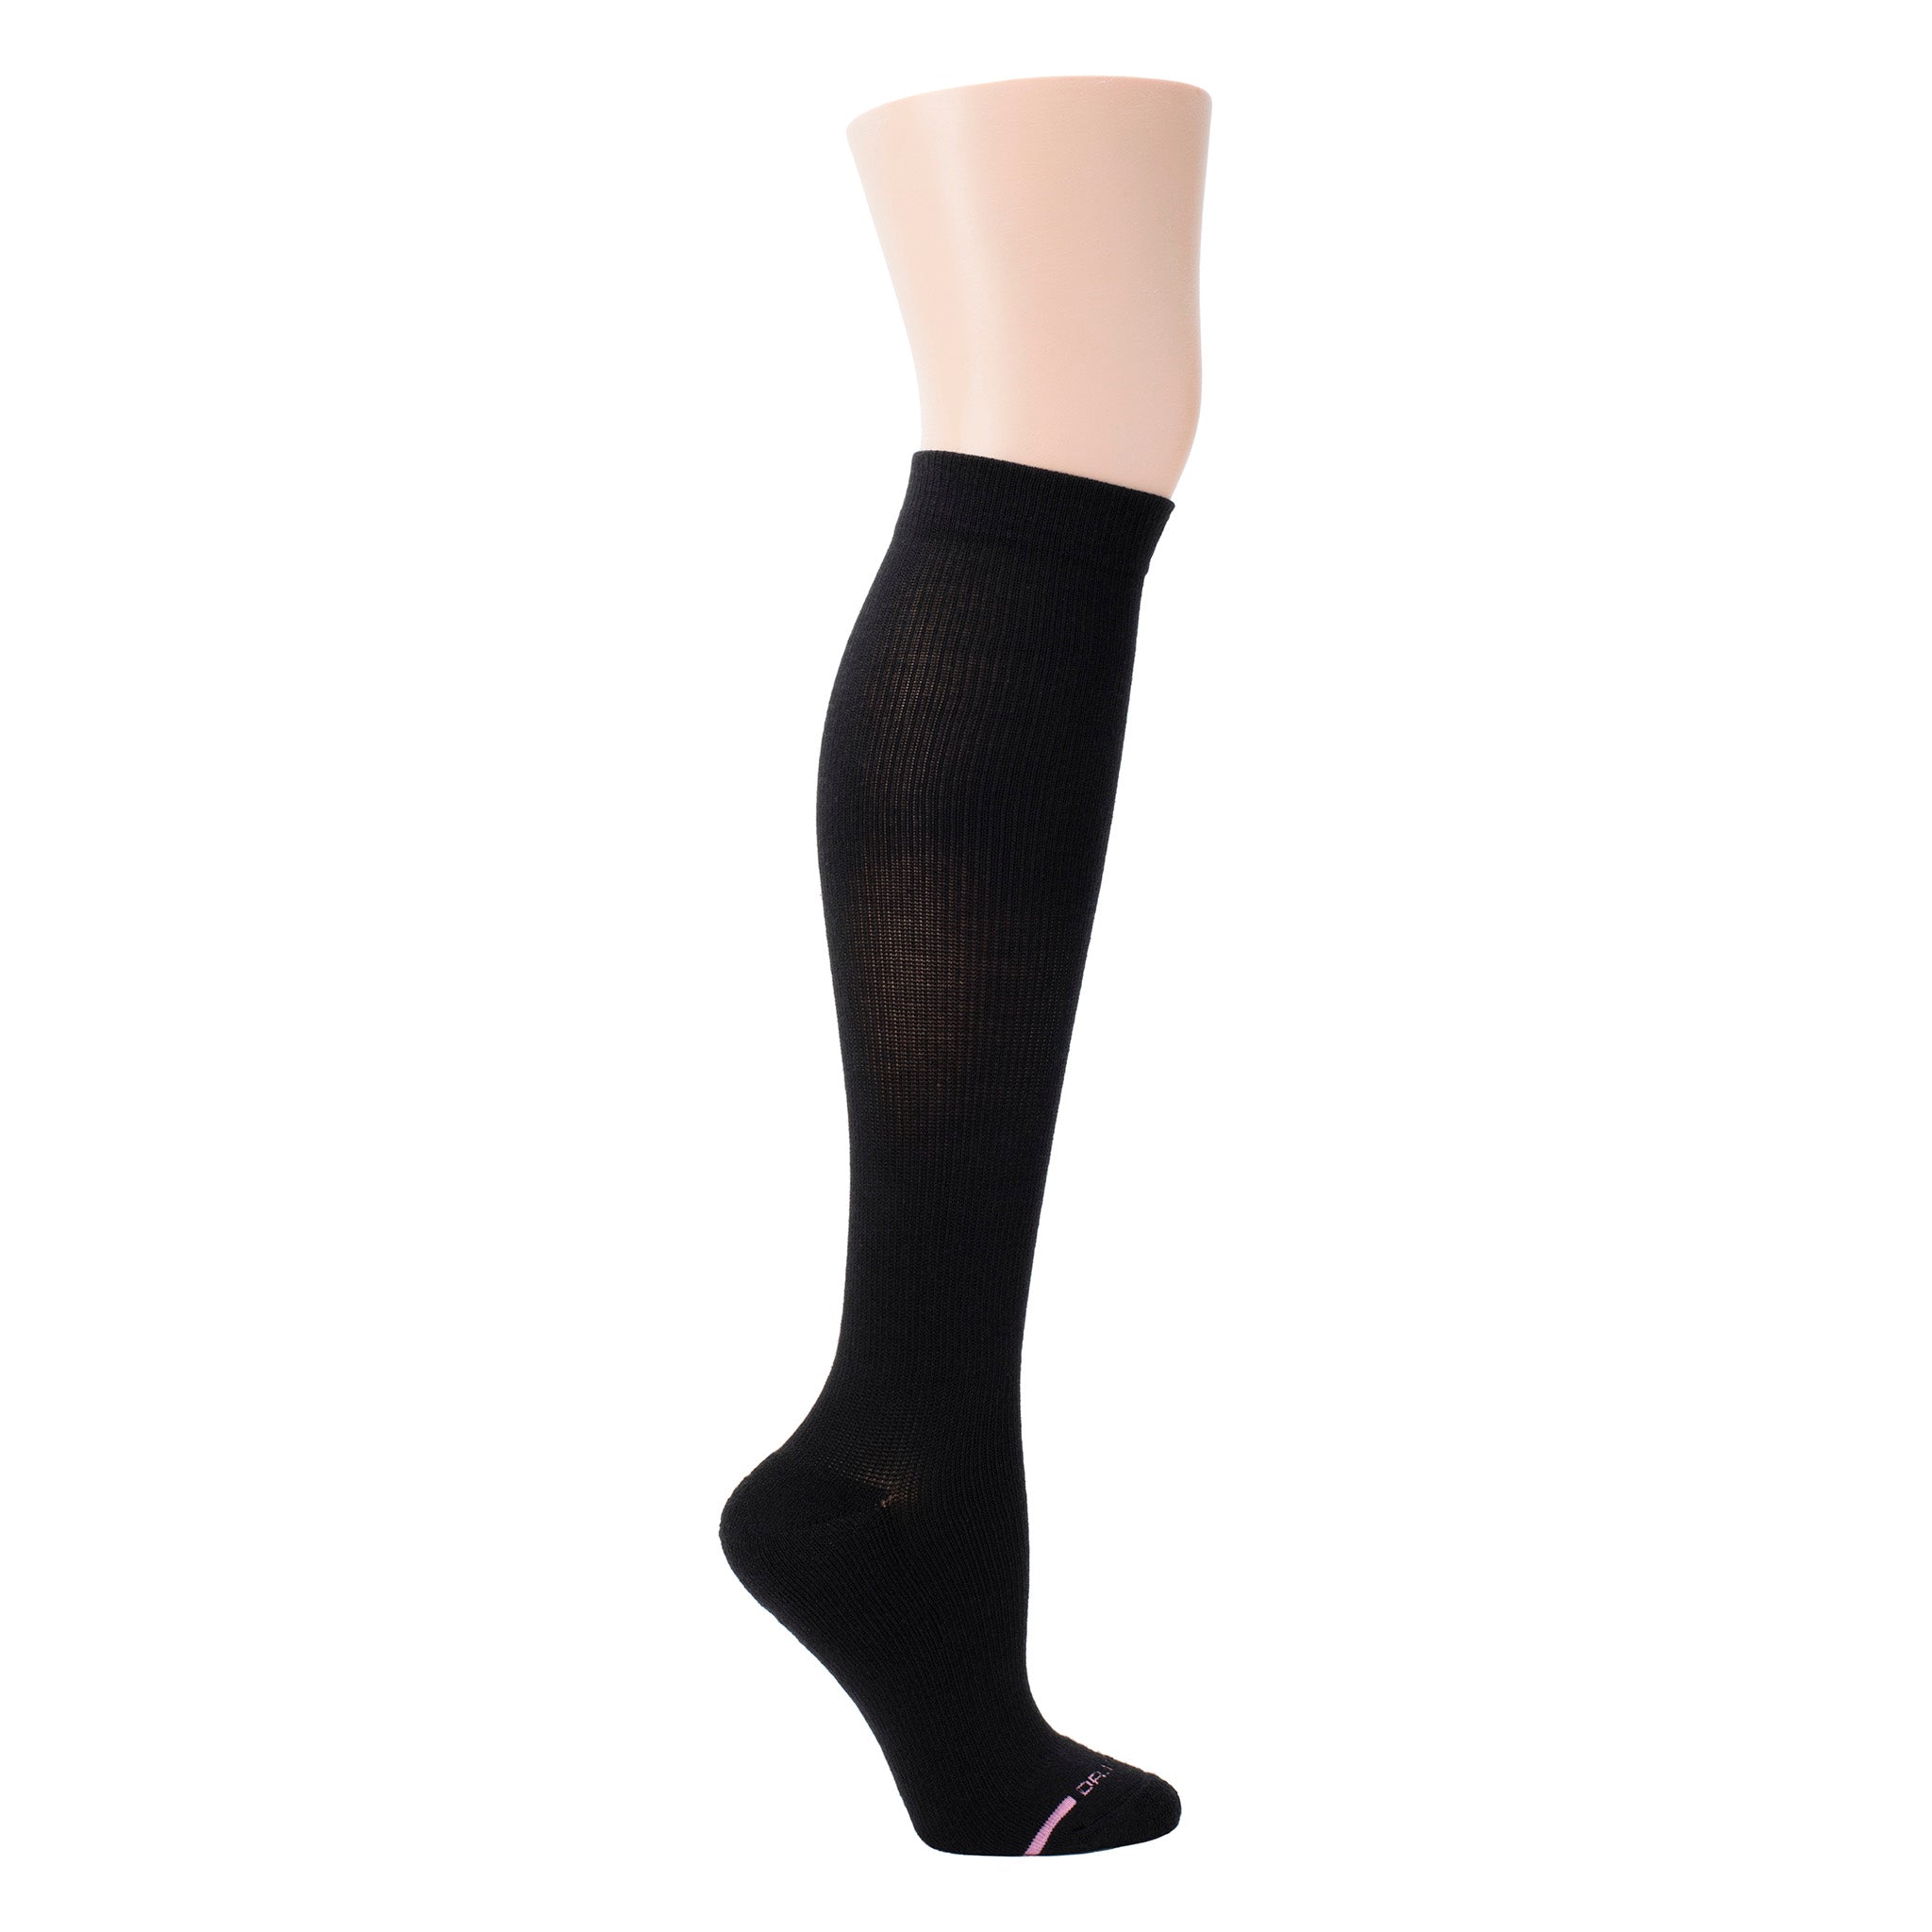 RELAXSAN M2080 (Black 1-S) Cotton medical compression tights (20